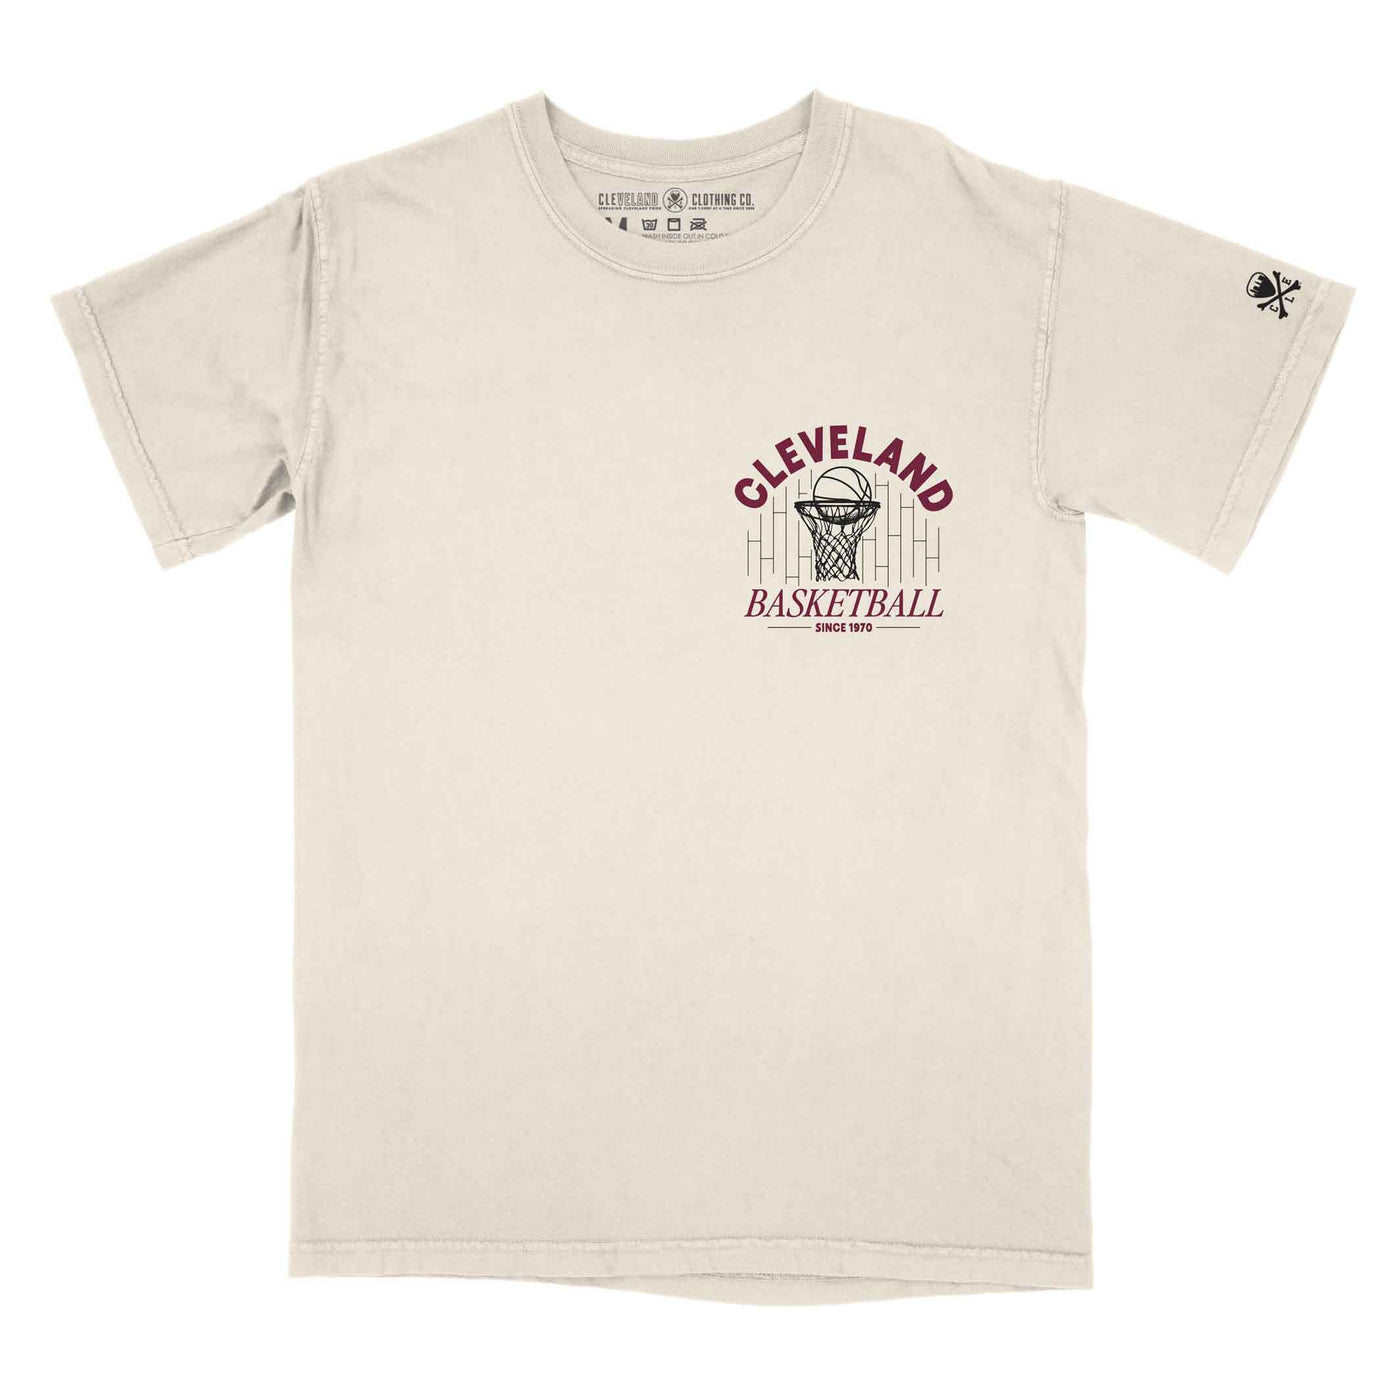 CLE Clothing Co Medium Shirt - Cleveland The Land Tee in Cavs Colors